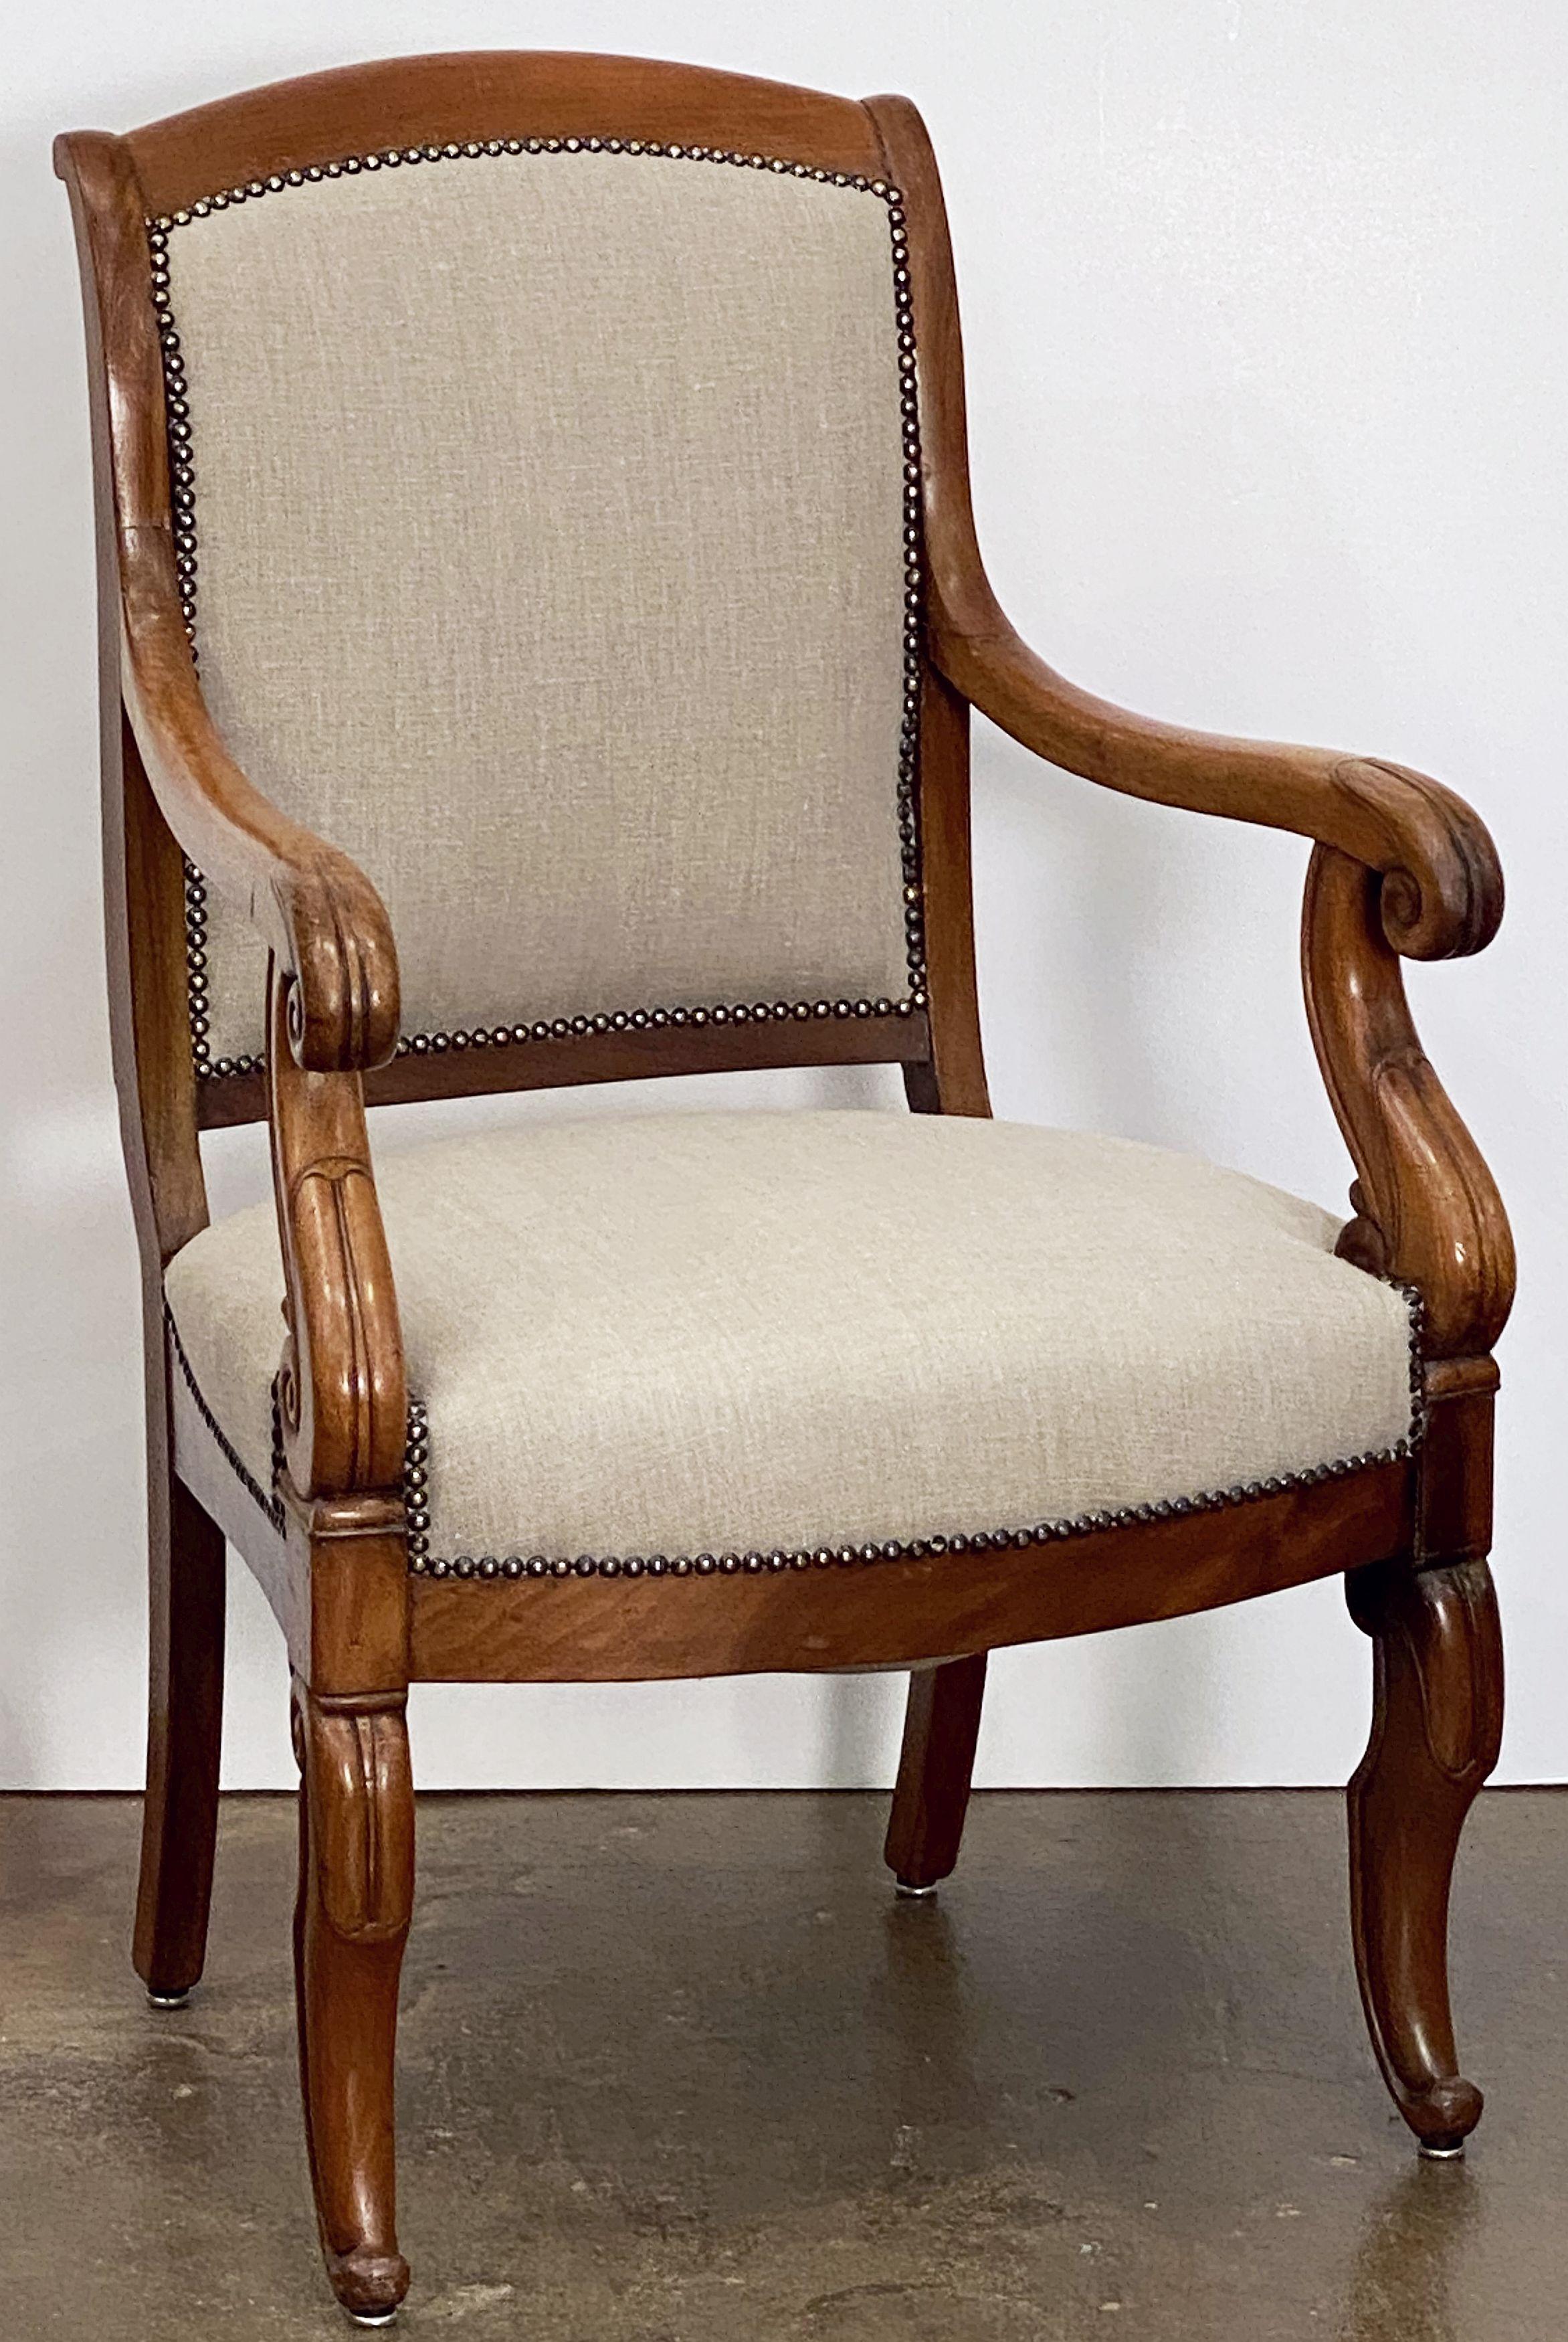 A fine French fauteuil desk or salon chair with carved detail to the frame, scroll arms, on raised legs, circa 1900.

Featuring a comfortable seat re-upholstered in plain linen fabric, with brass nail-head decorative trim.

Dimensions: H 36 3/4